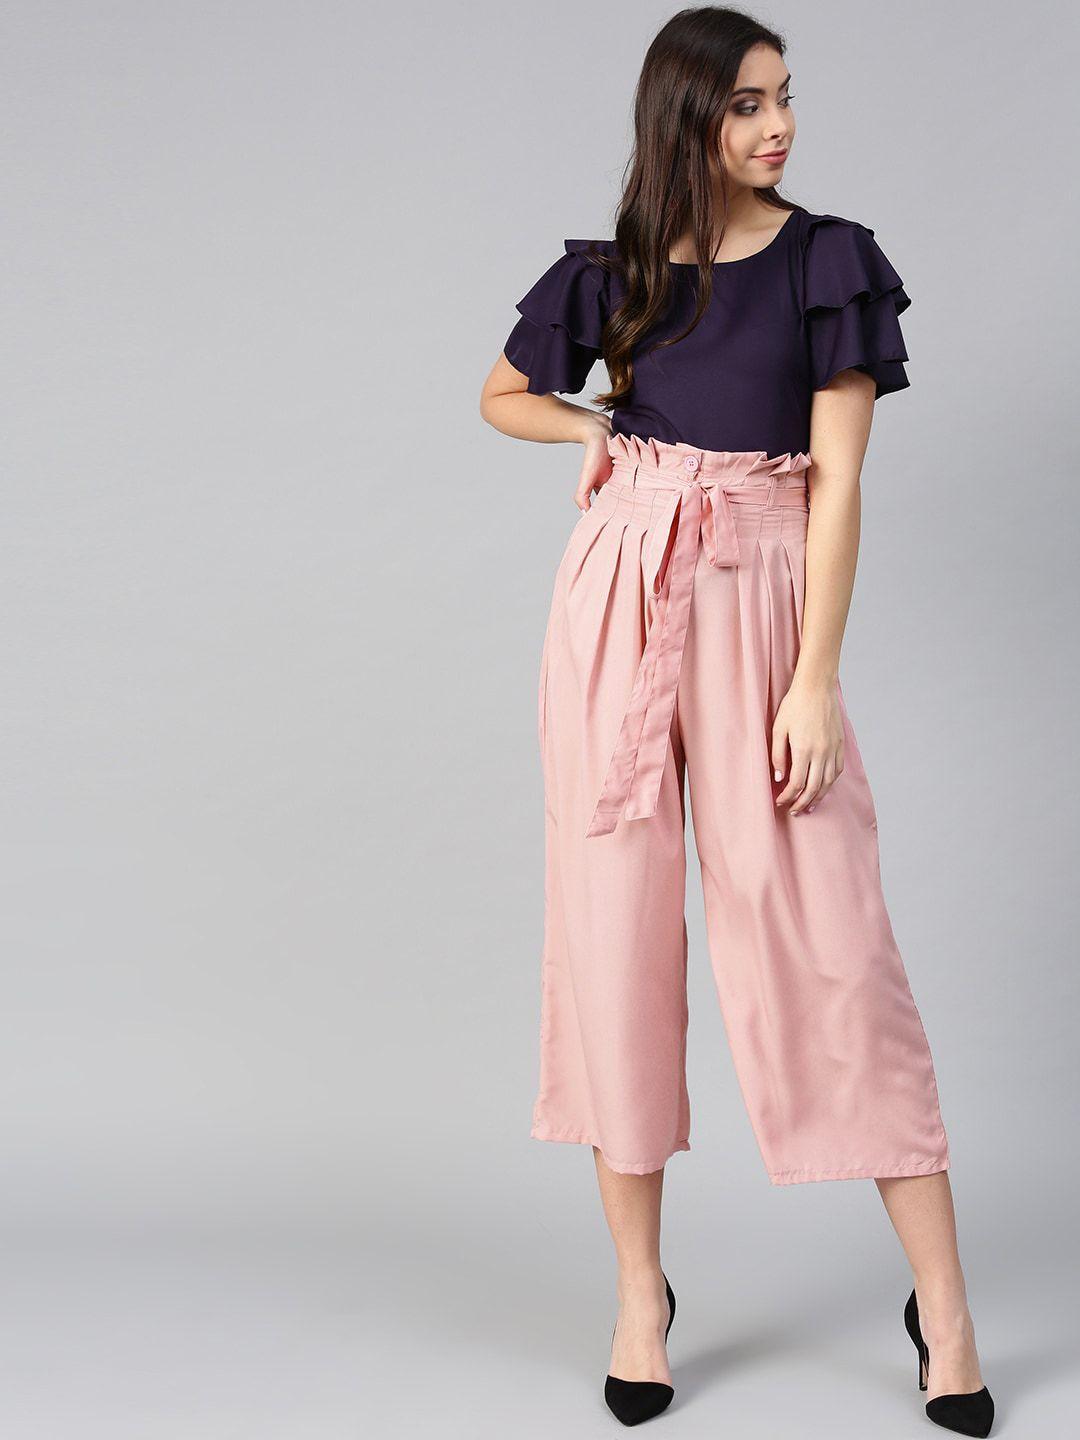 bitterlime layered sleeve top with trousers